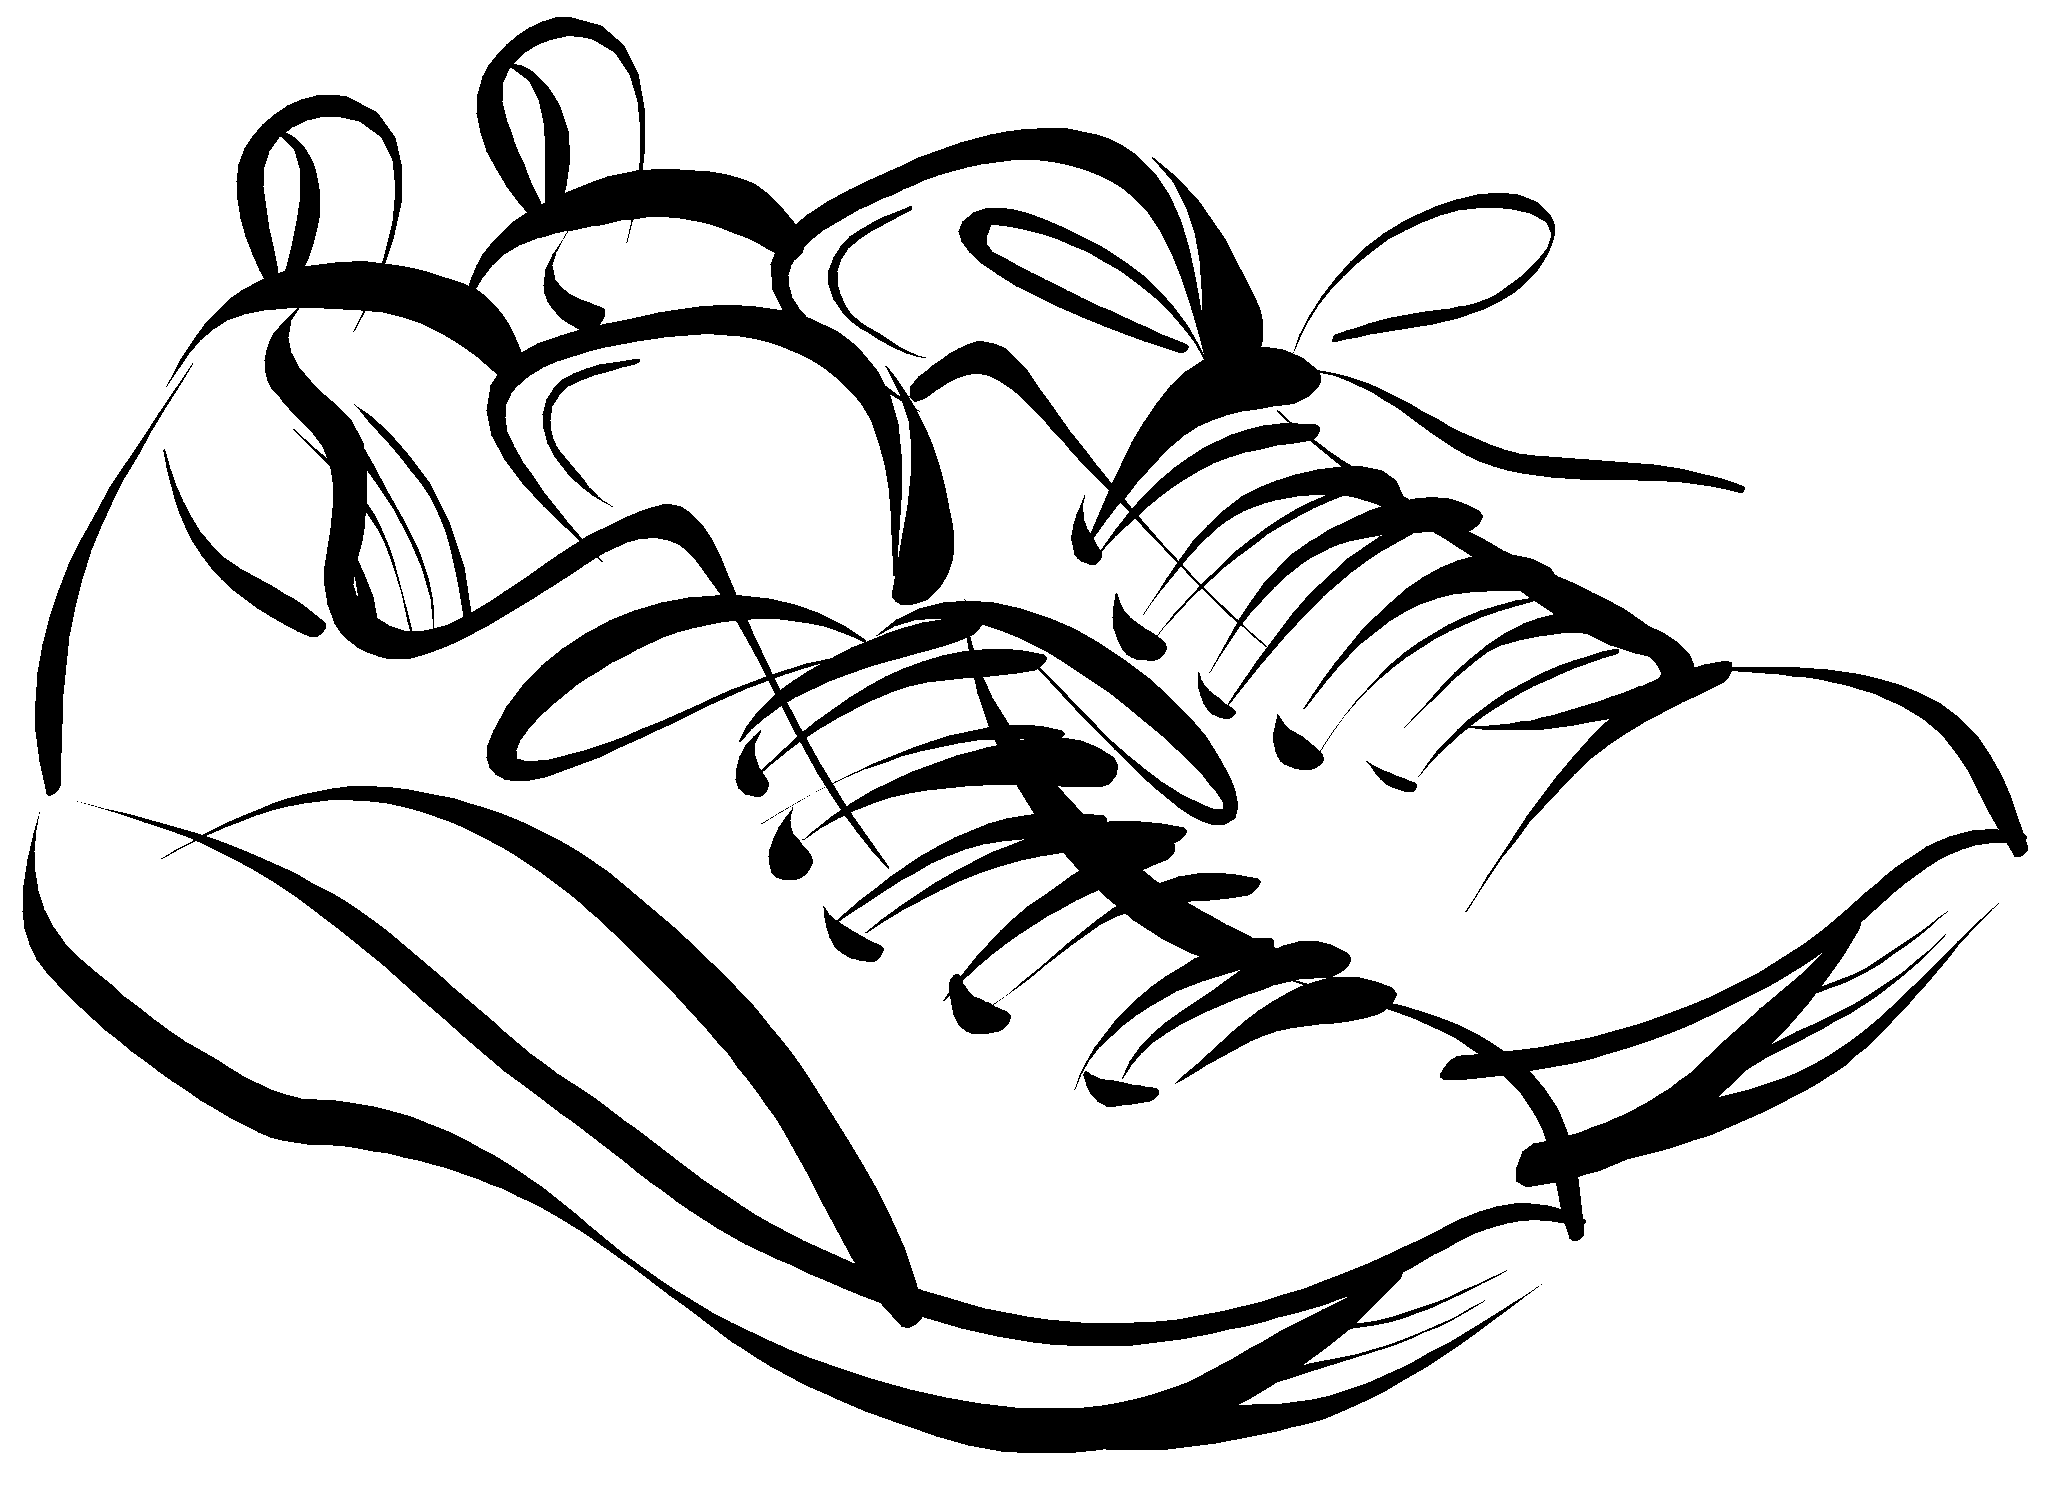 Running Shoes Drawing   Clipart Panda   Free Clipart Images